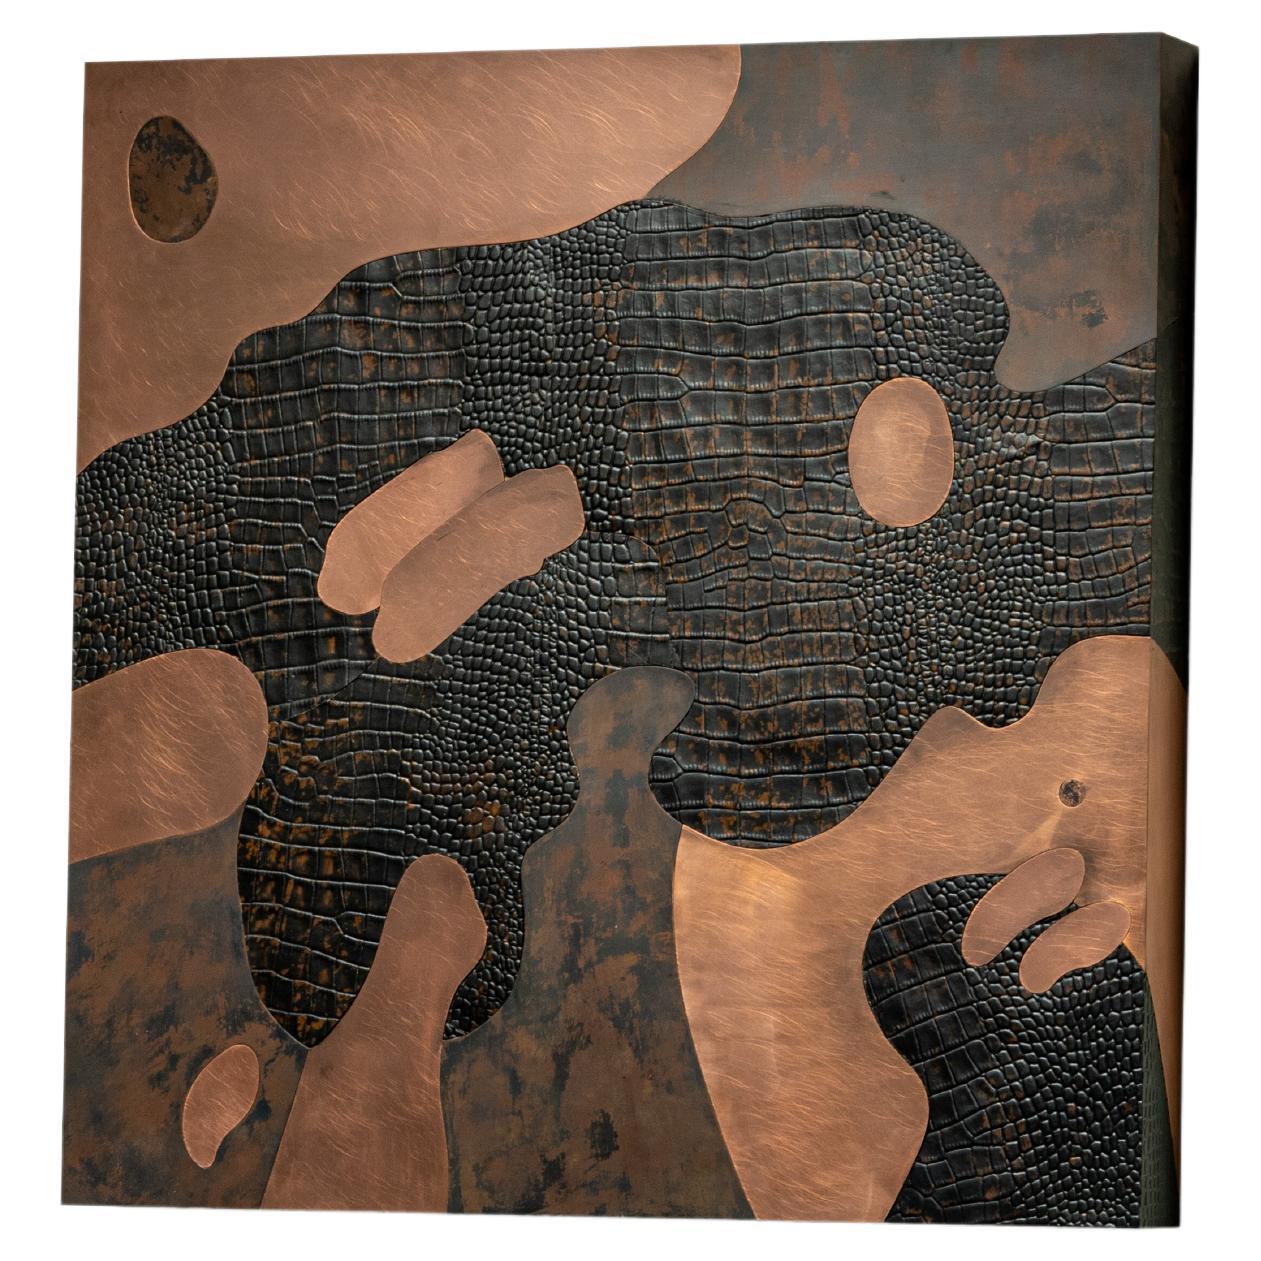 Limited Edition Zenith Wall Art I made in Pure Copper and Resin